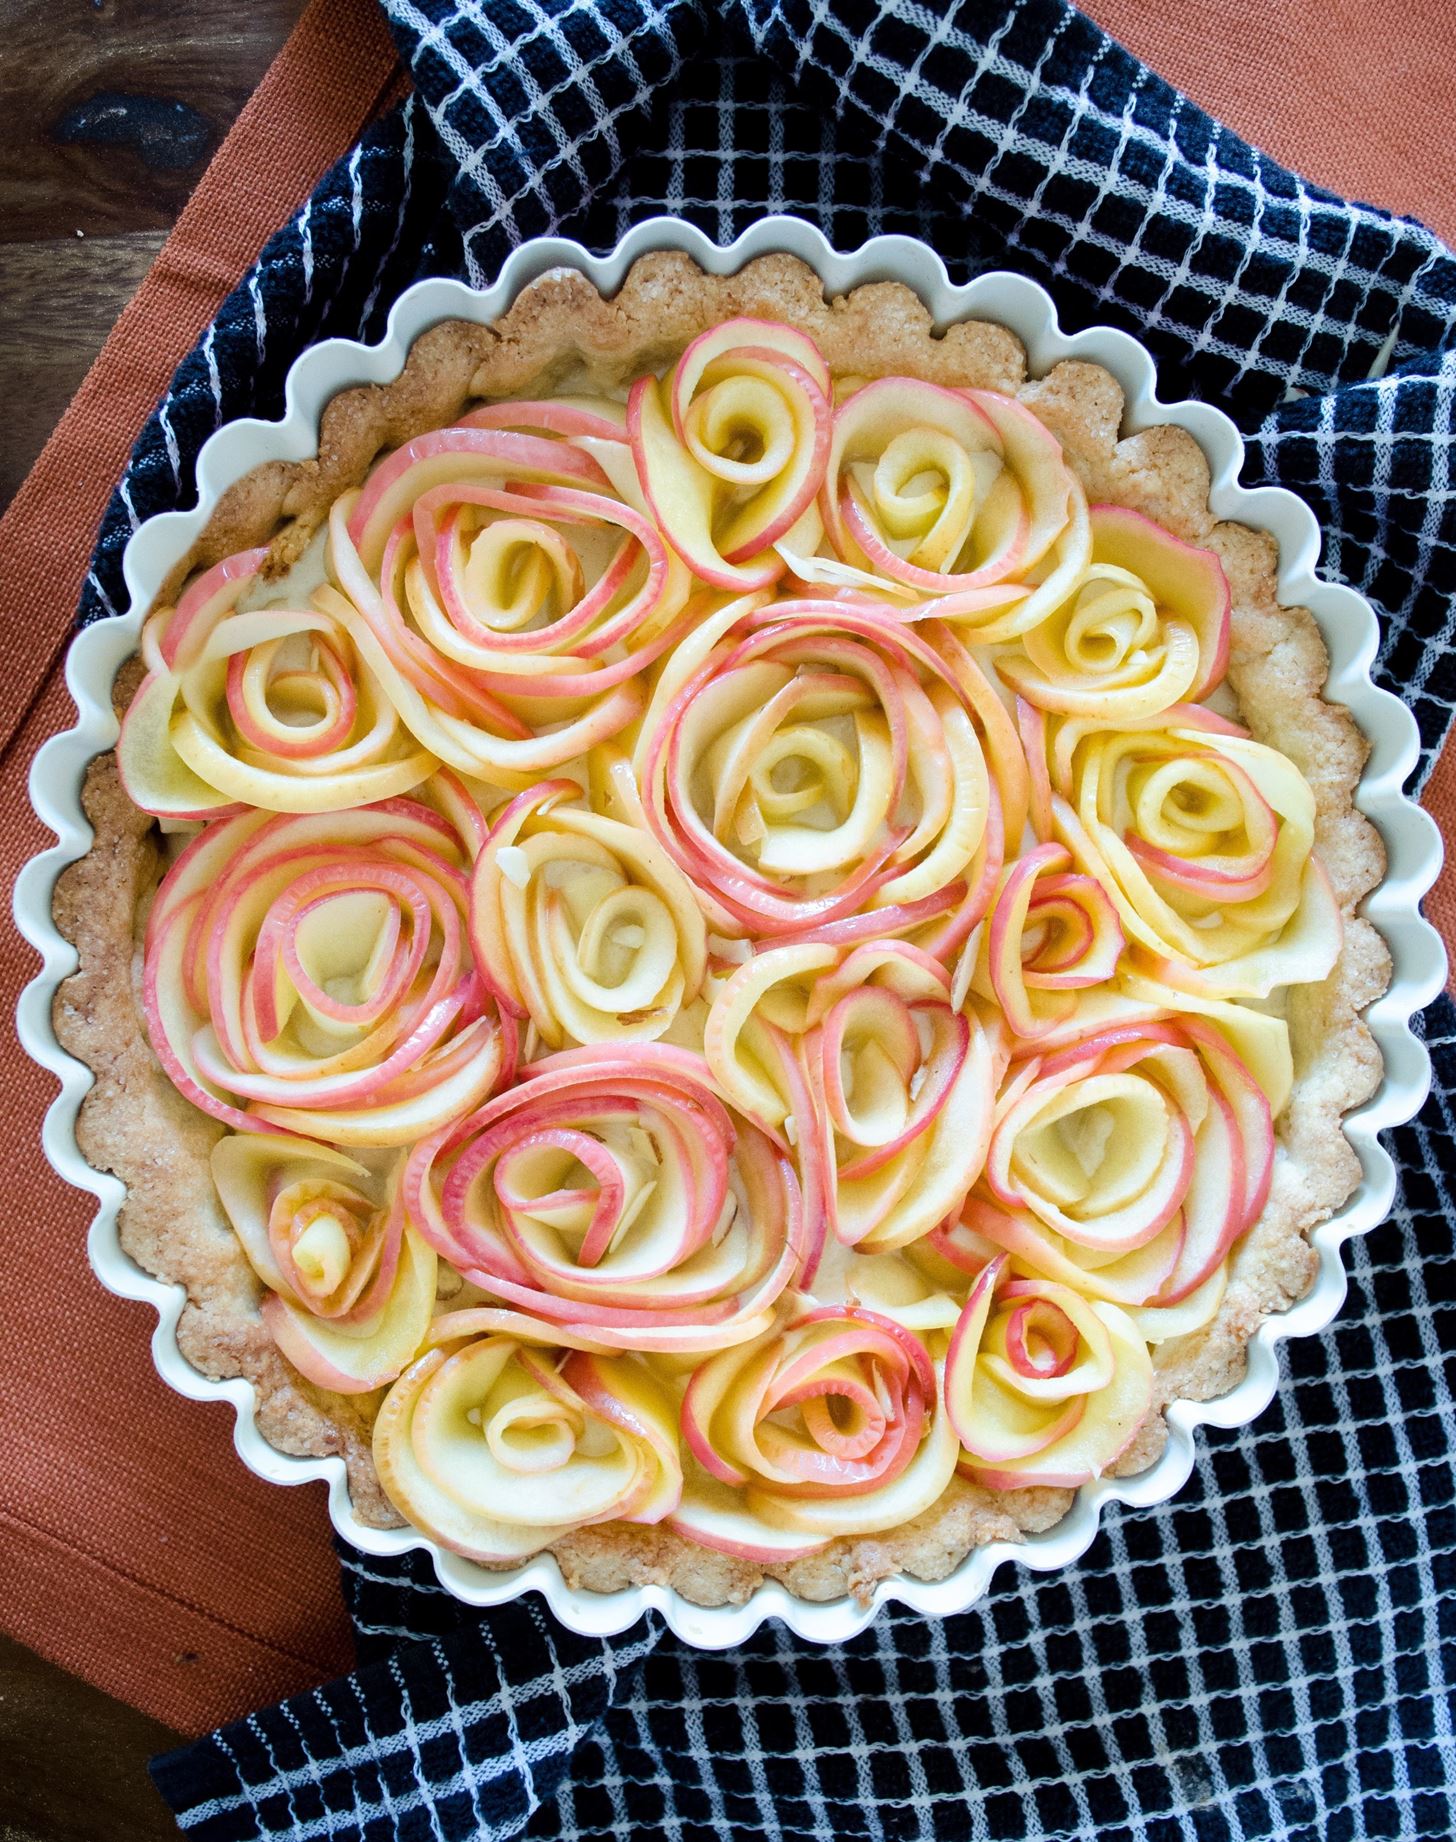 Apple Roses Are the Classiest Way to Make a Fruit Tart